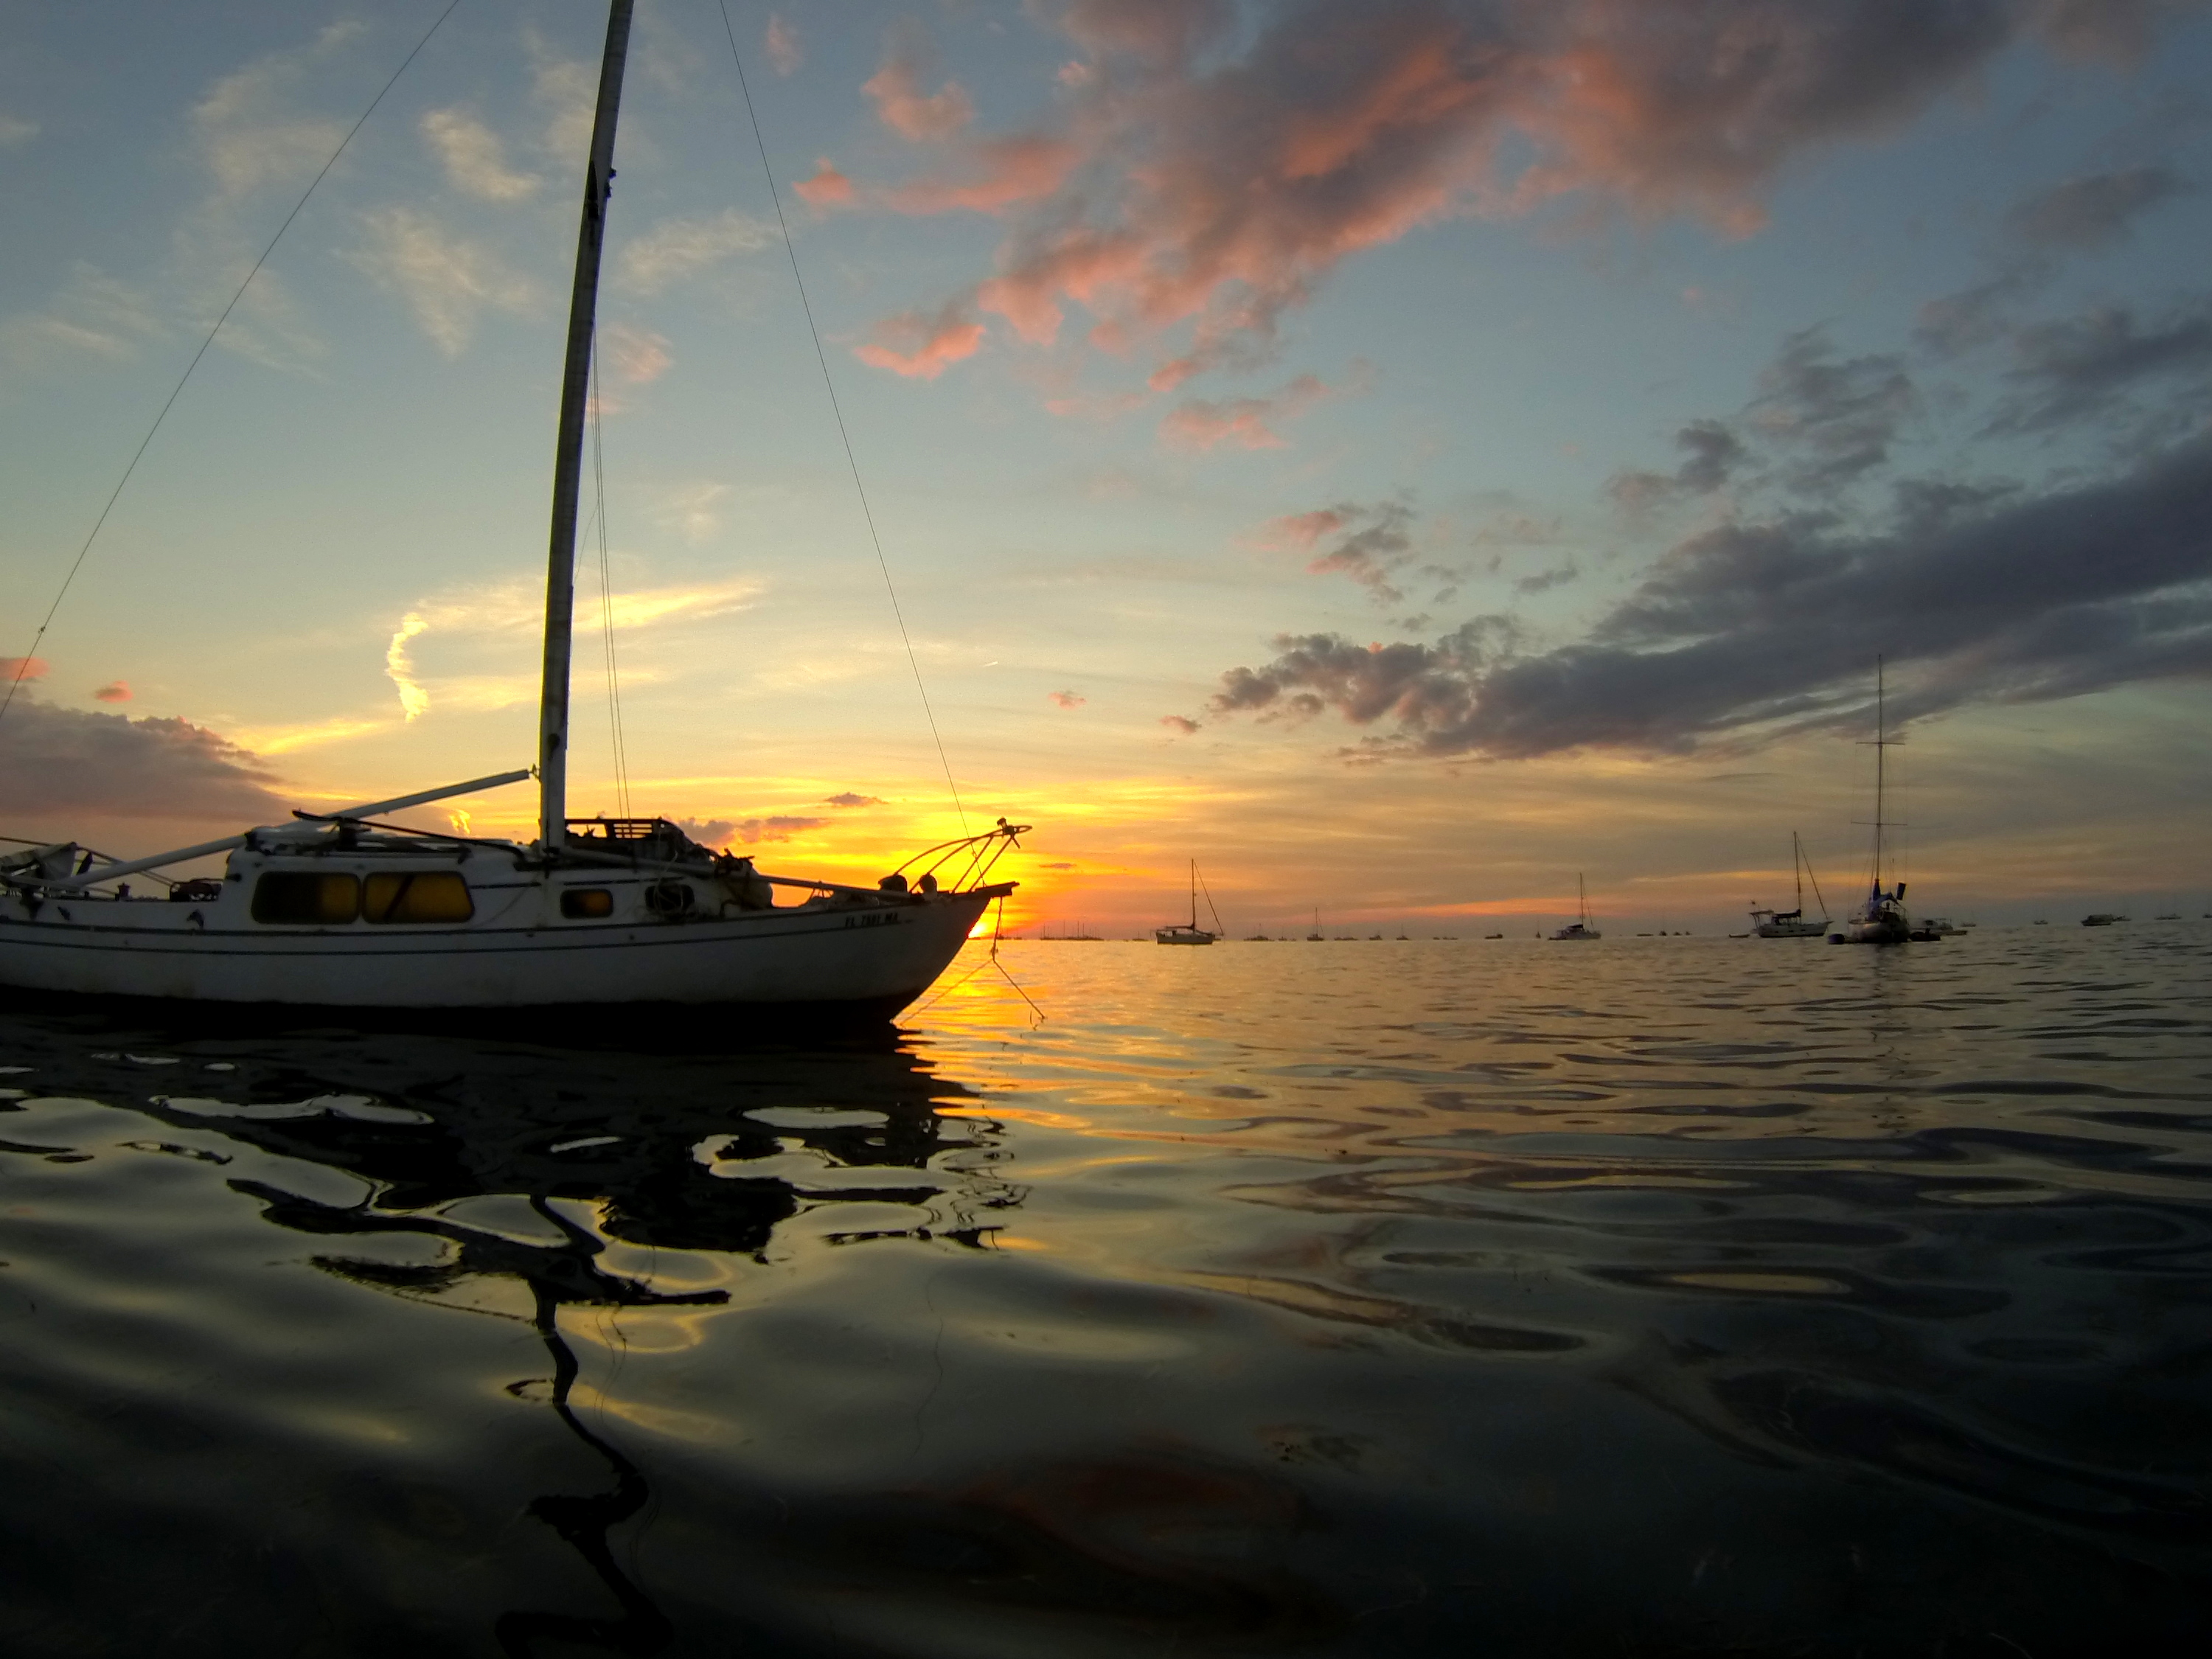 A sailboat blocks the last seconds of the setting sun on a glass calm afternoon in key west.